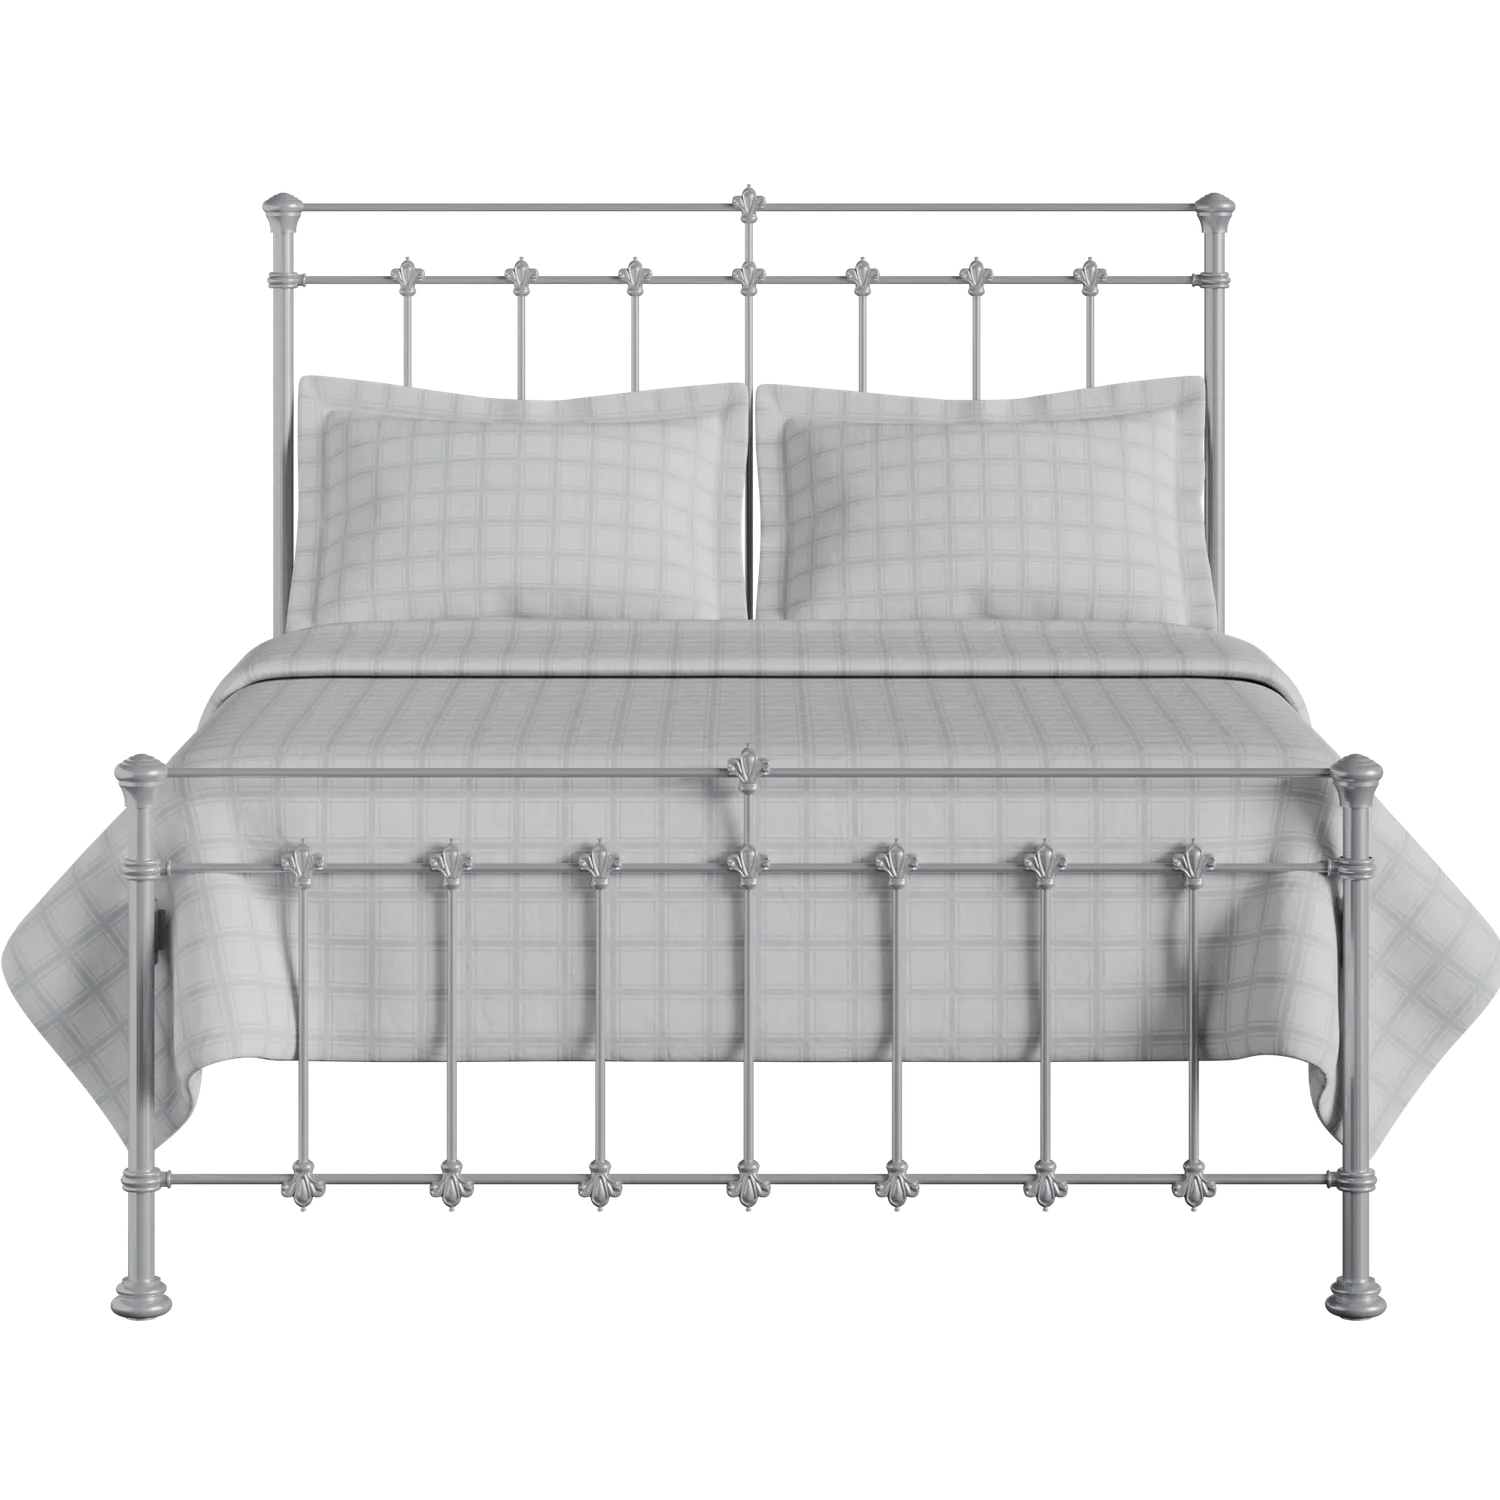 Edwardian iron/metal bed in silver